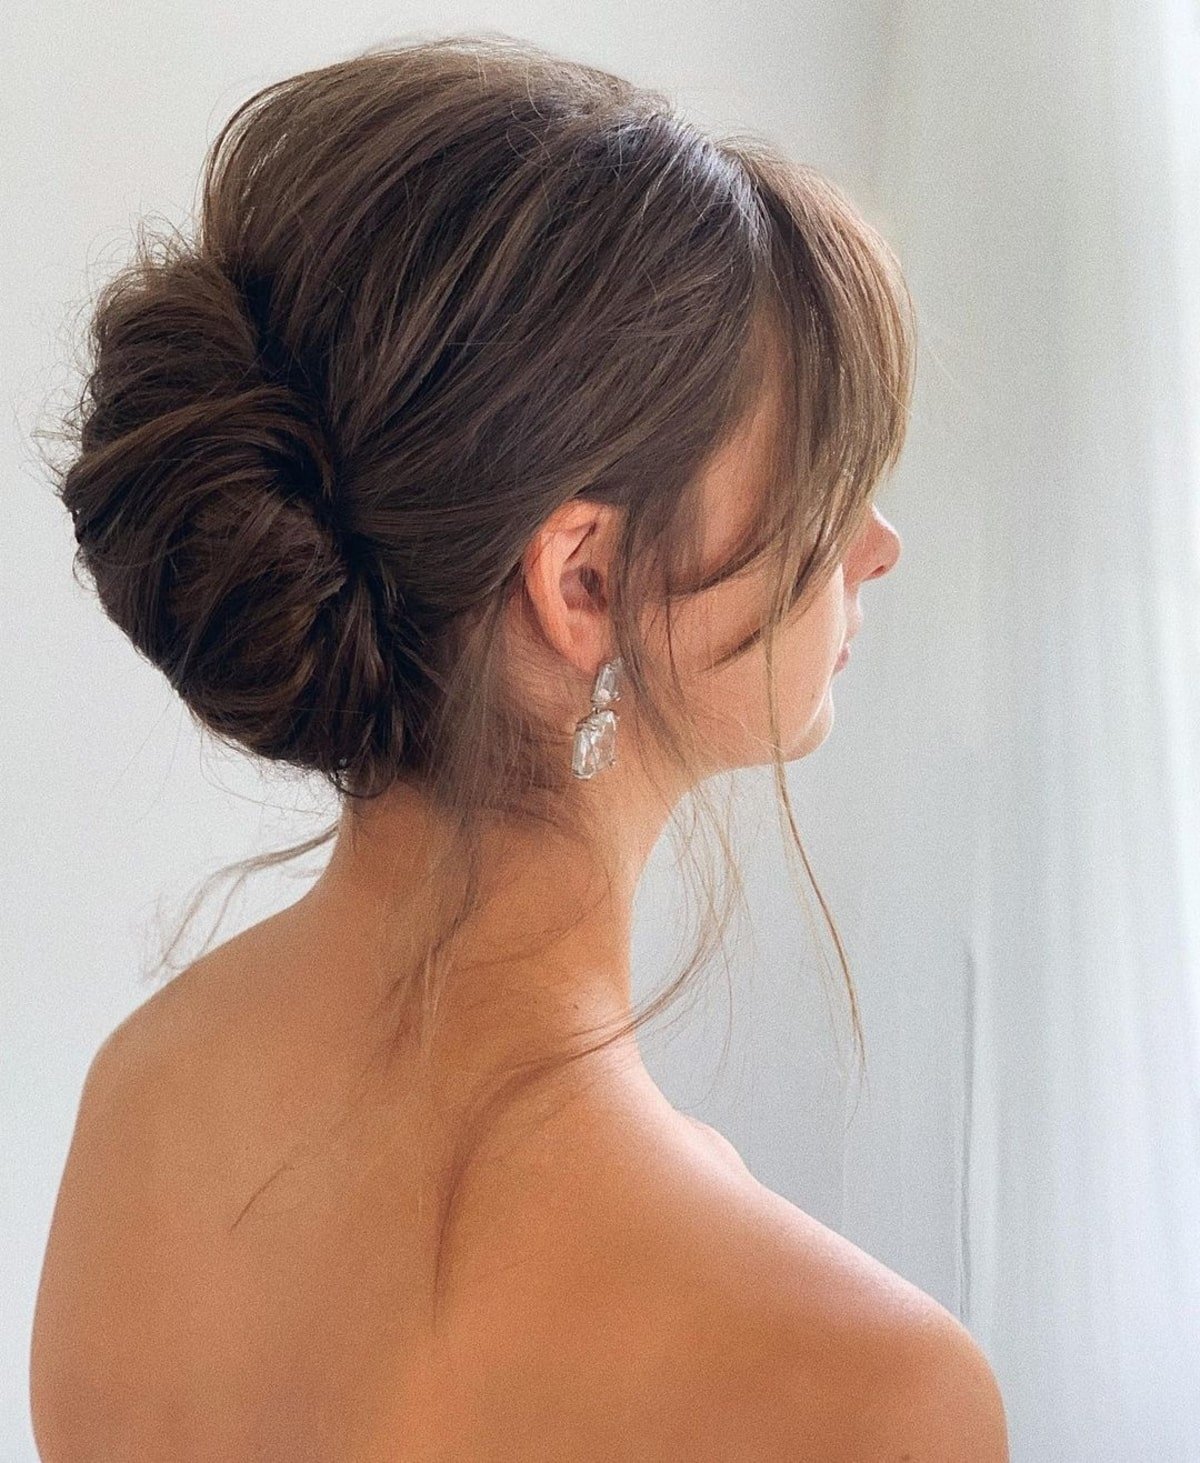 Messy bun for the wedding day for long thin hair